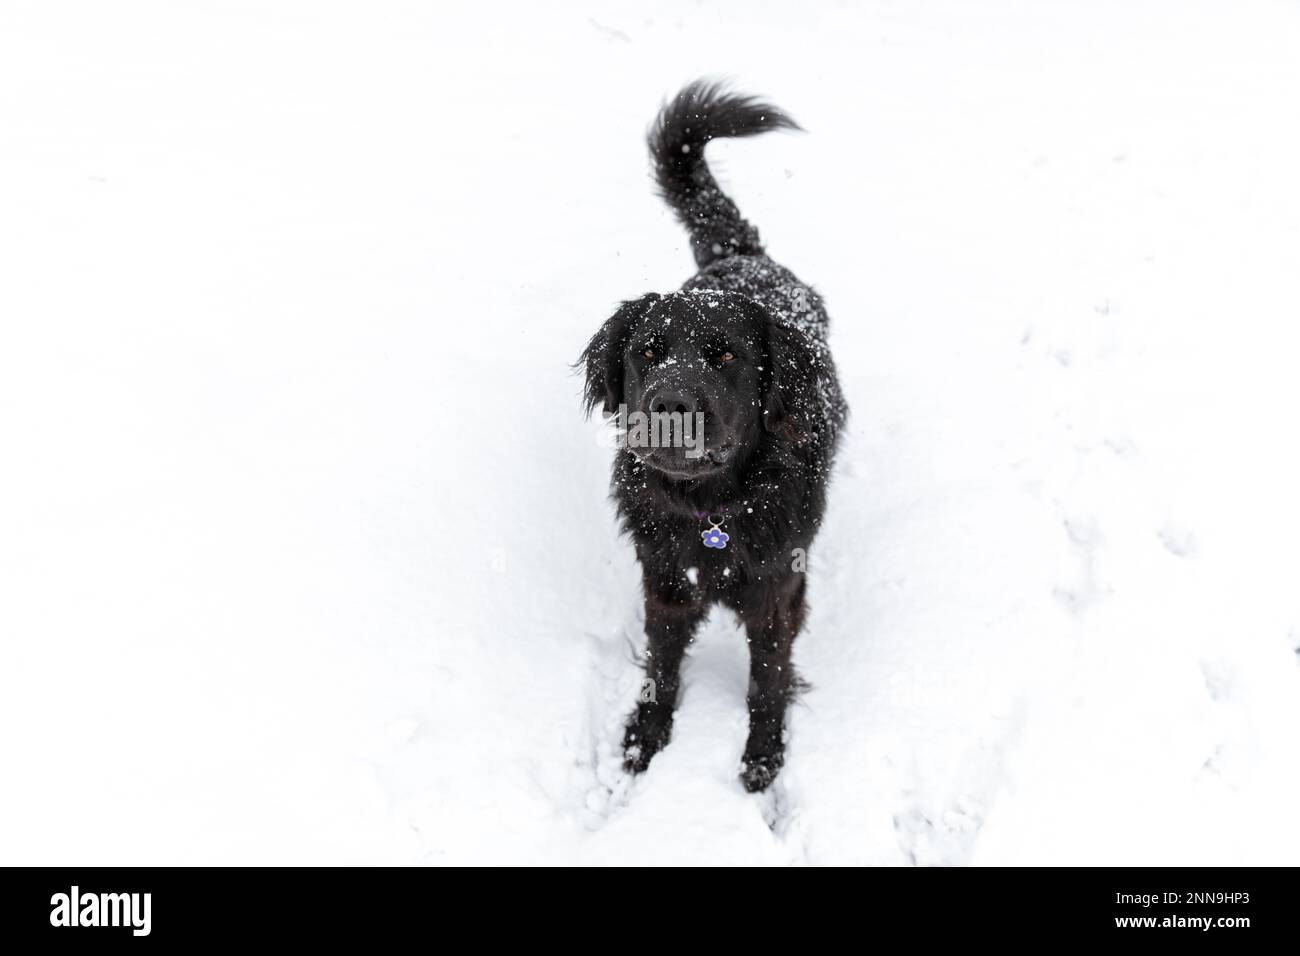 A black newfoundland dog in the snow Stock Photo